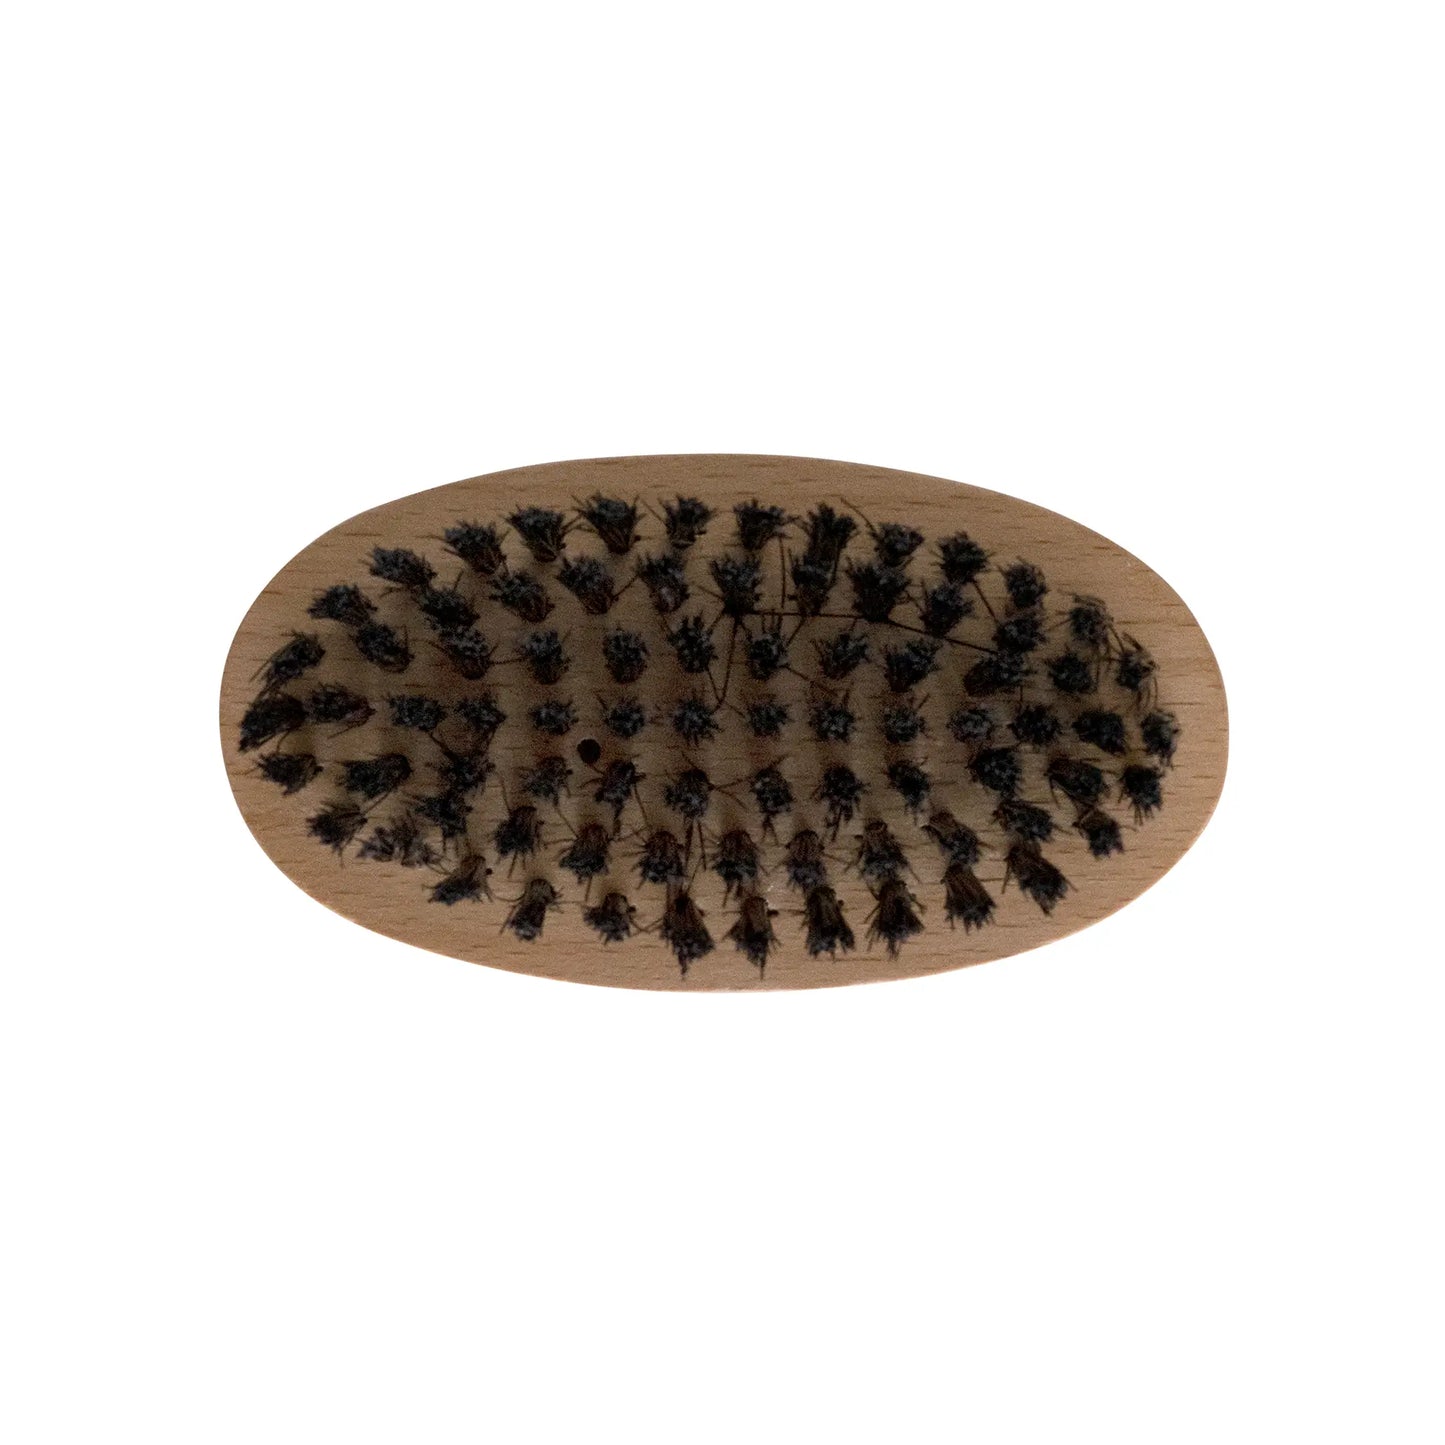 Grooming brush for beards, featuring wooden handle and black bristles.